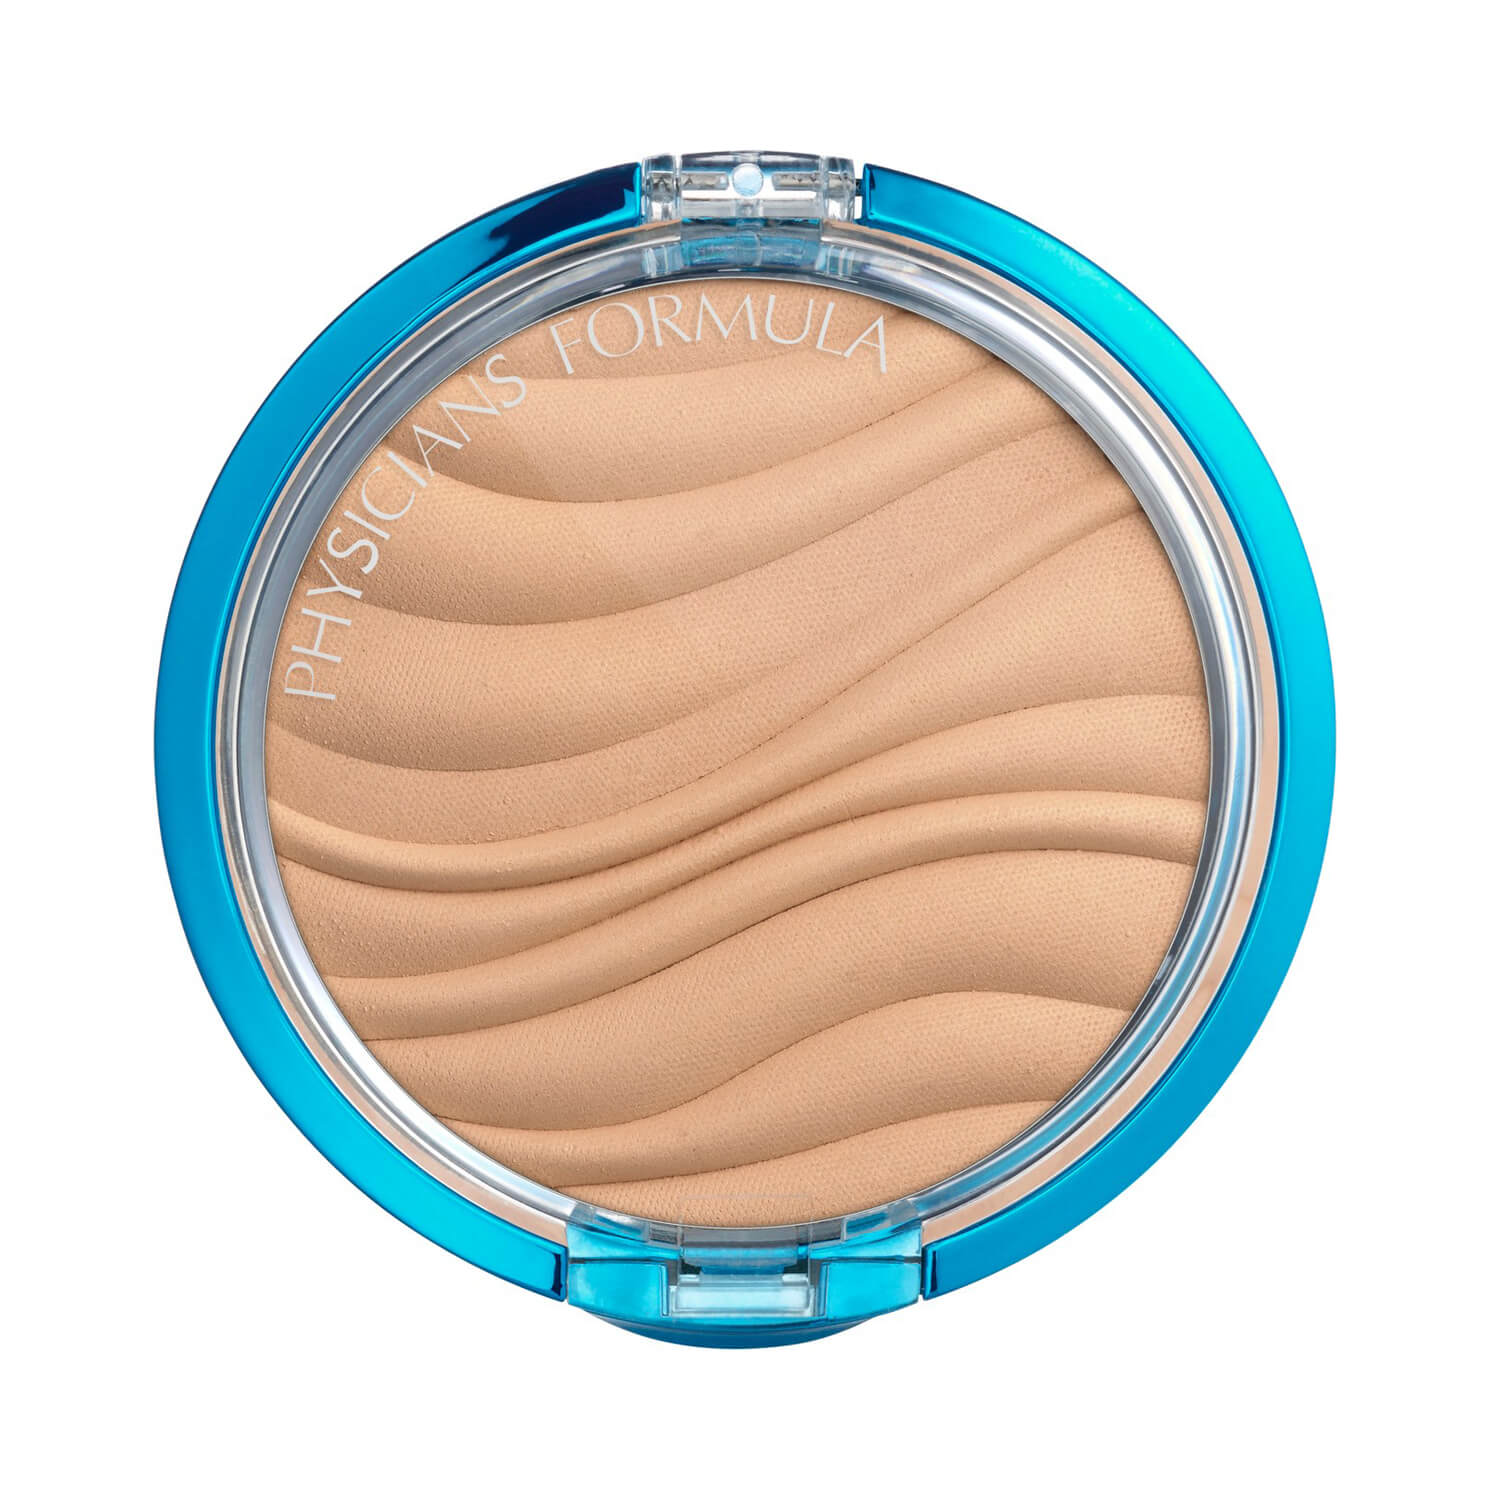 Physicians Formula Mineral Wear Talc-Free Mineral Airbrushing Pressed Powder SPF 30 Translucent 7586-3